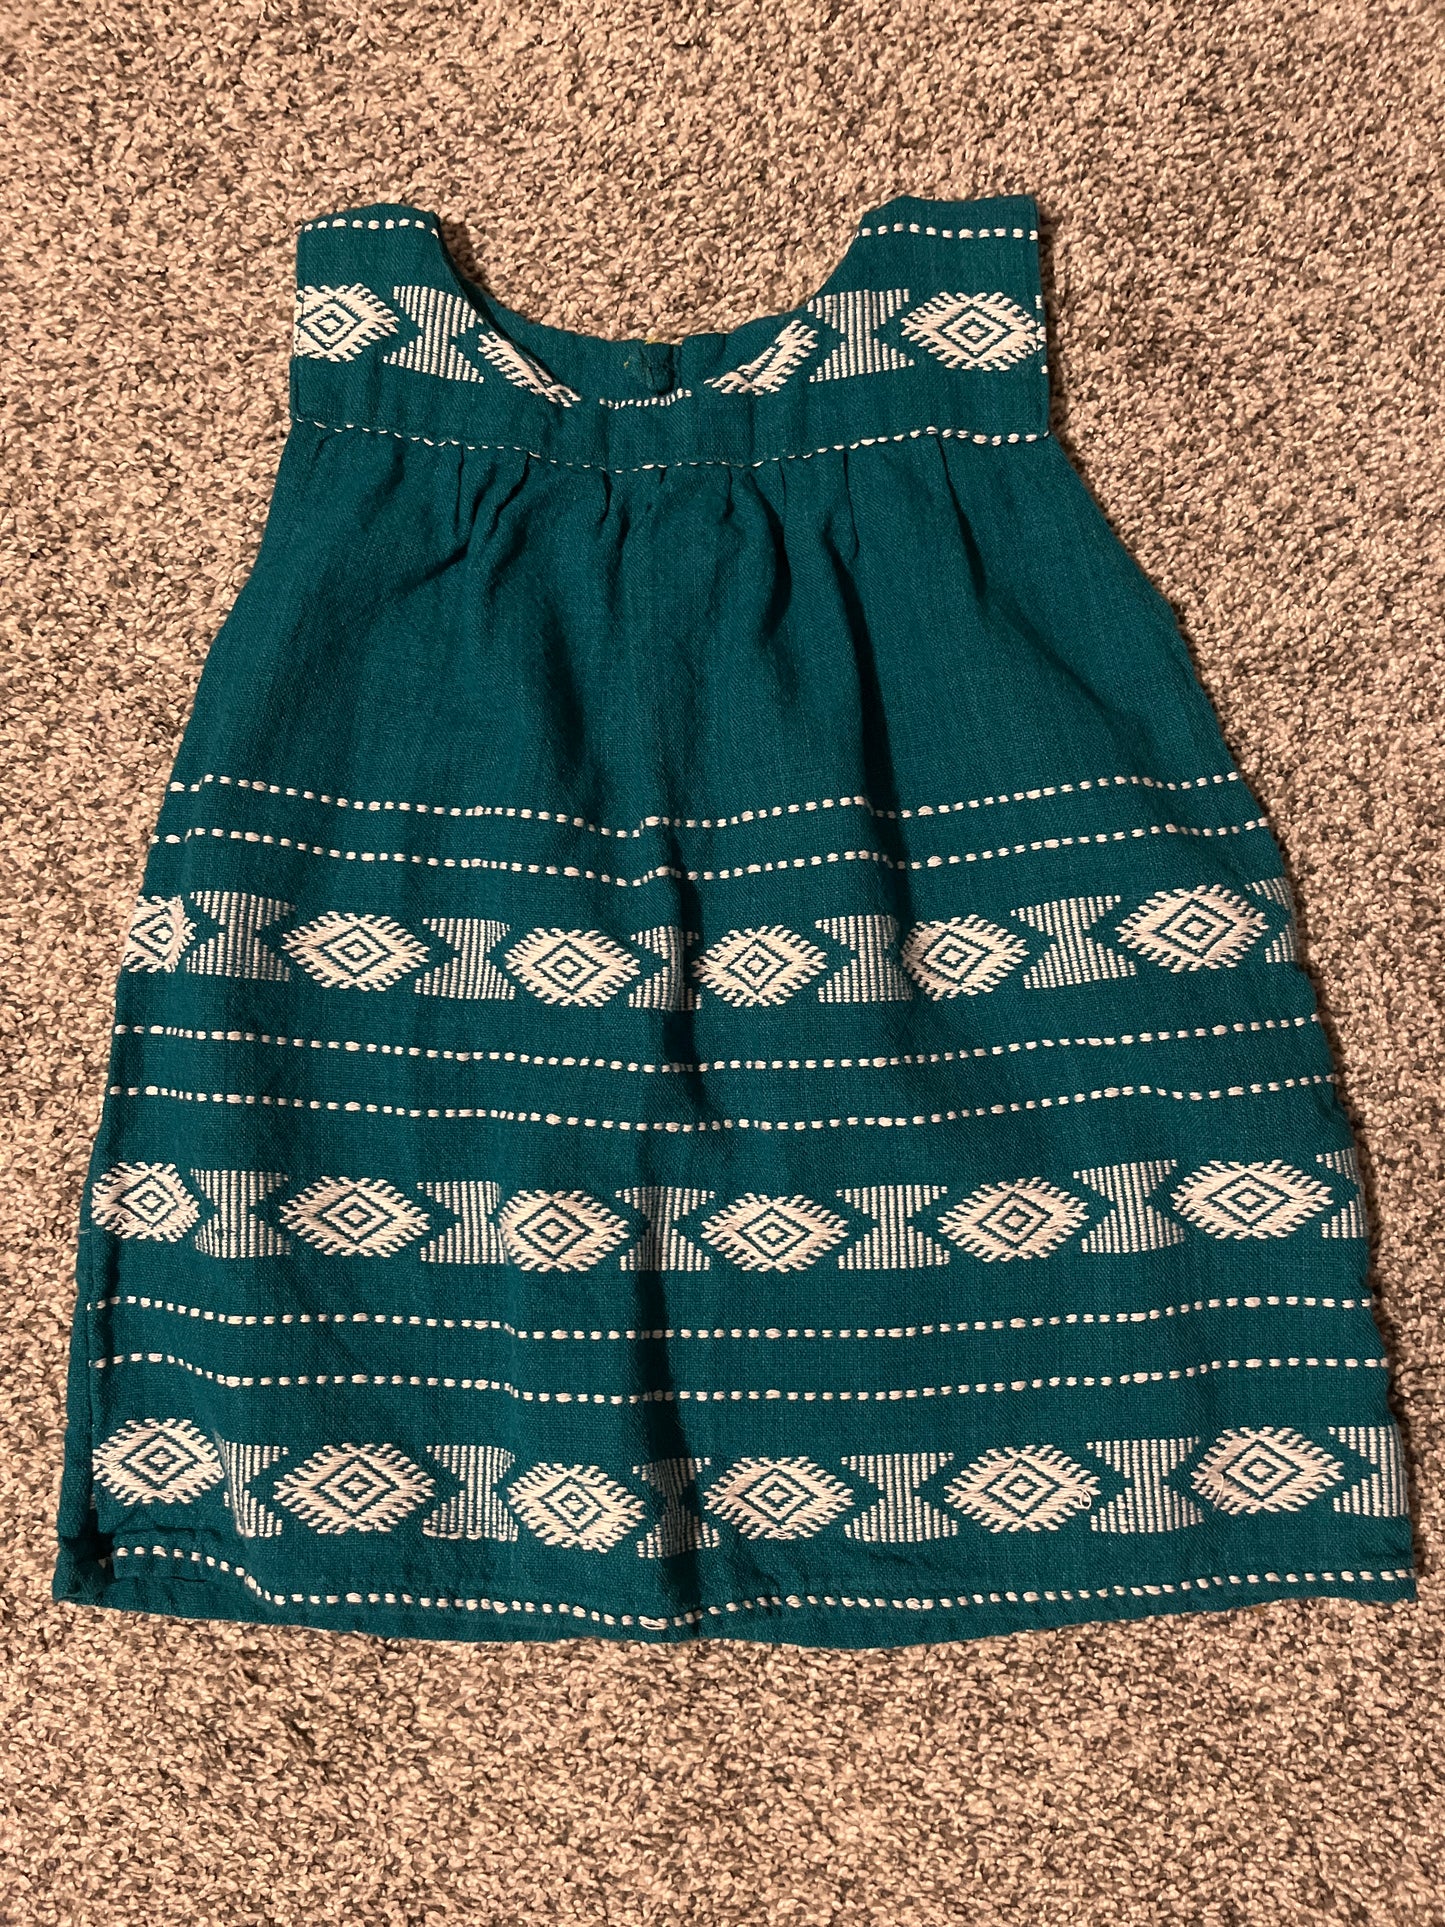 2t embroidered dress